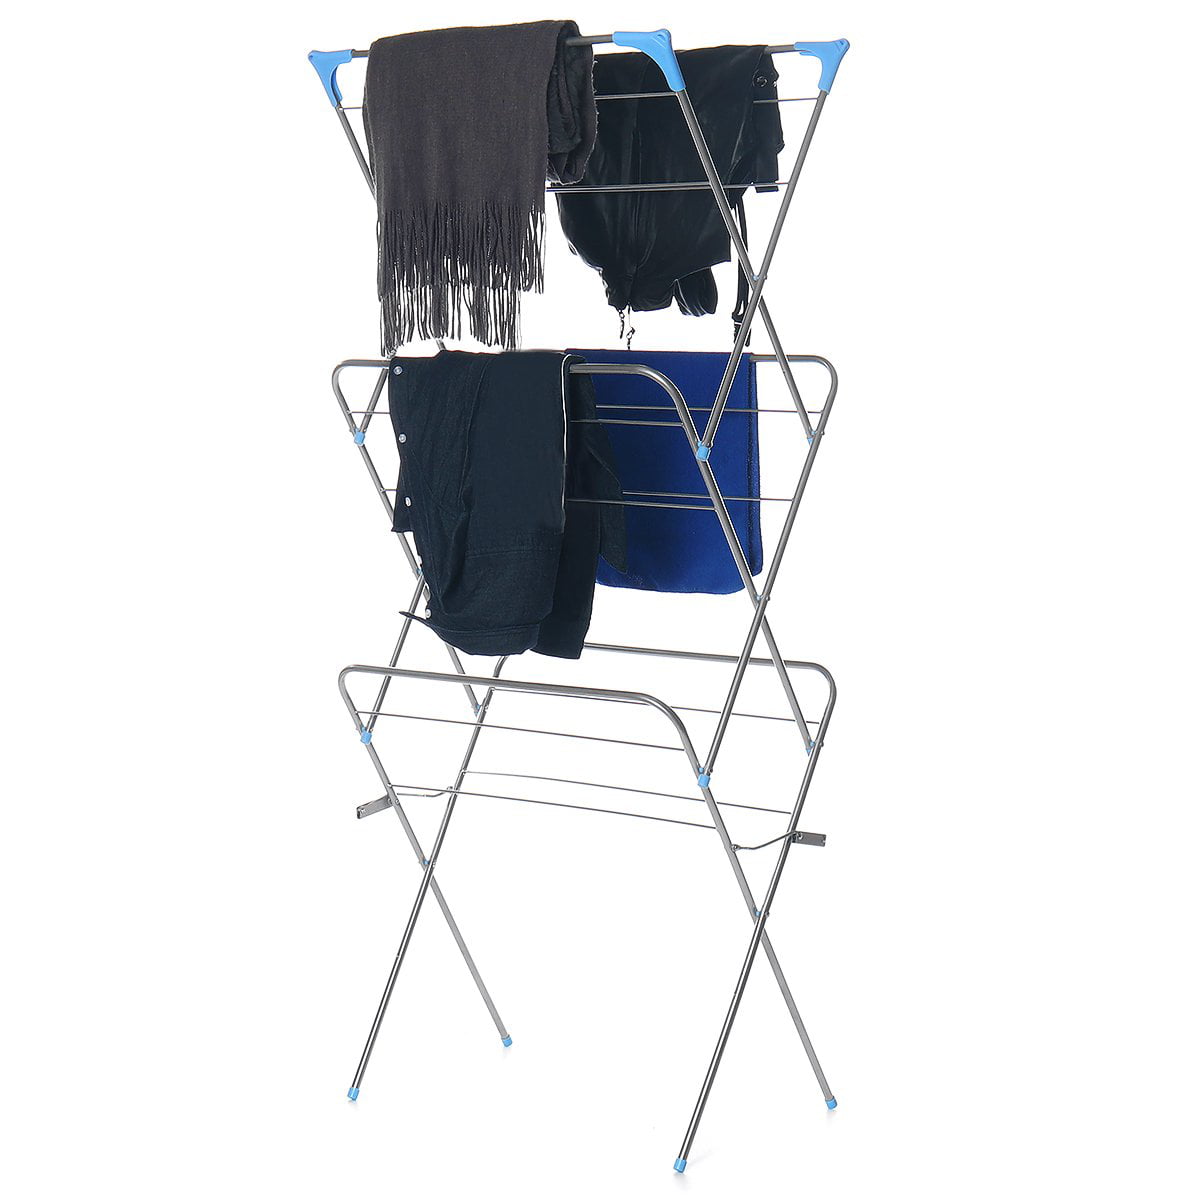 3Tier Clothes Drying Rack Collapsible and Compact for Indoor/Outdoor UsePortable Metal Rack